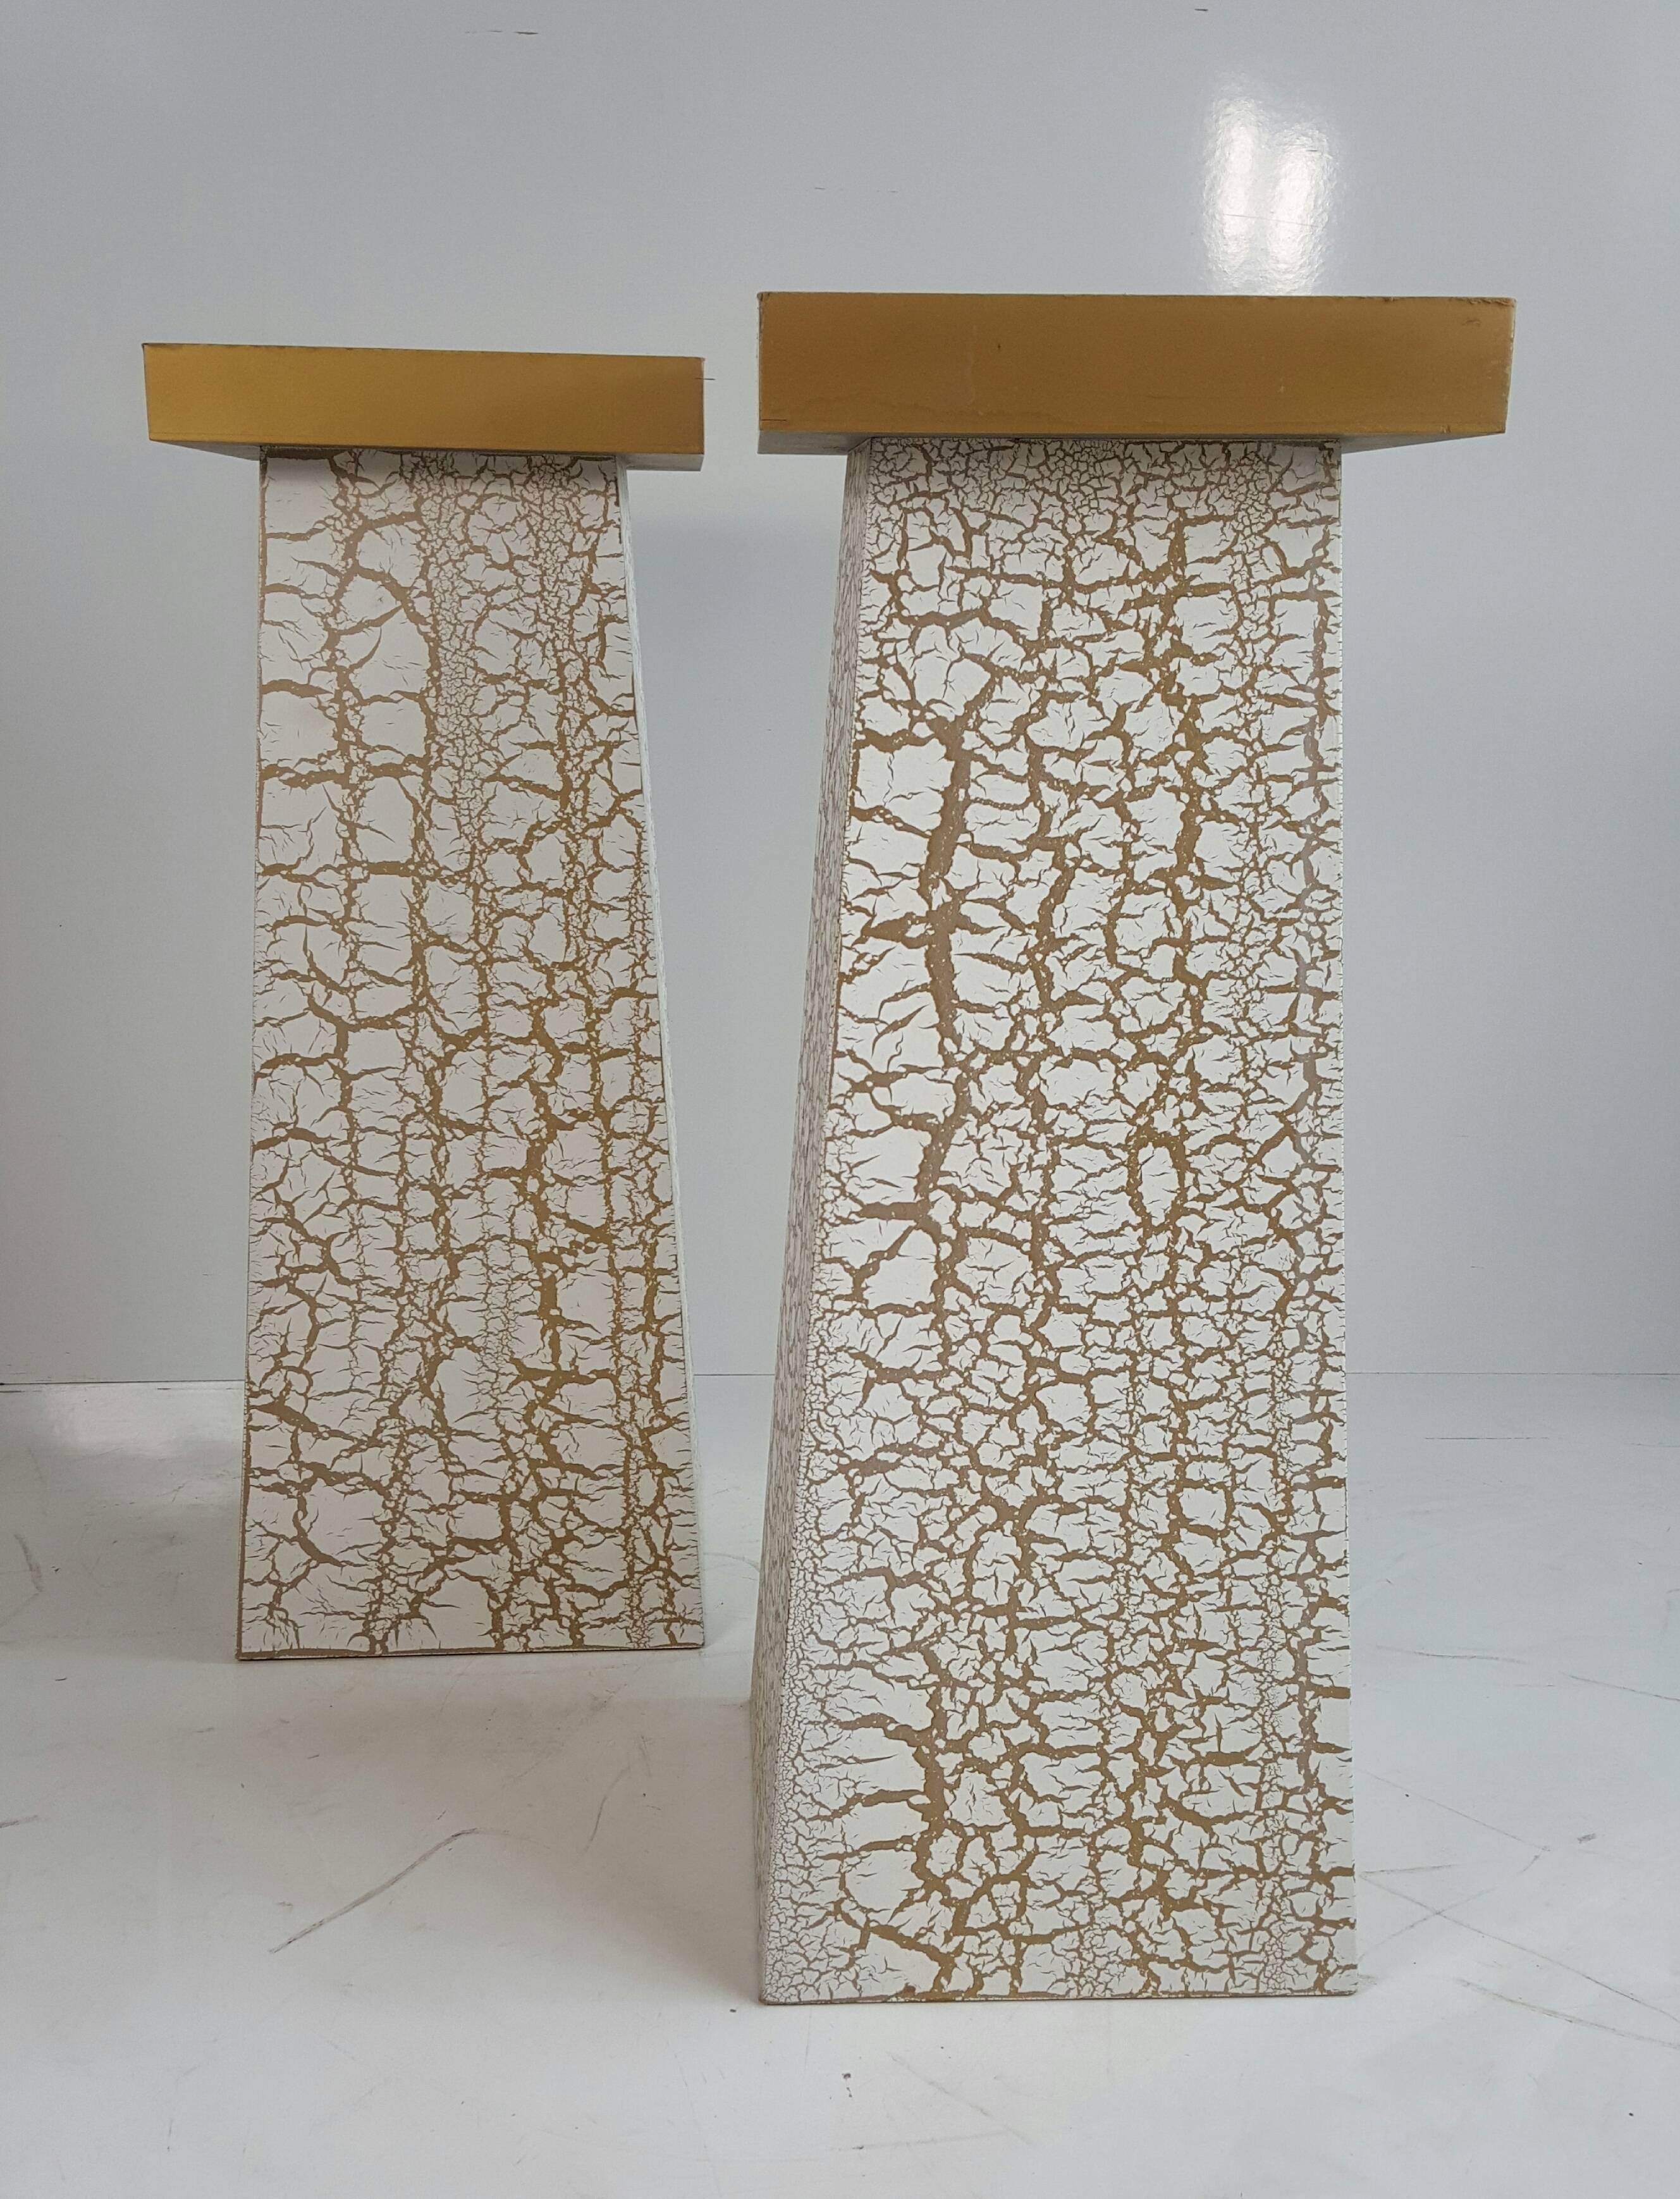 Modernist crackle finish plant stands / pedestals, original paint and surface. Interesting gold and white crackle finish.